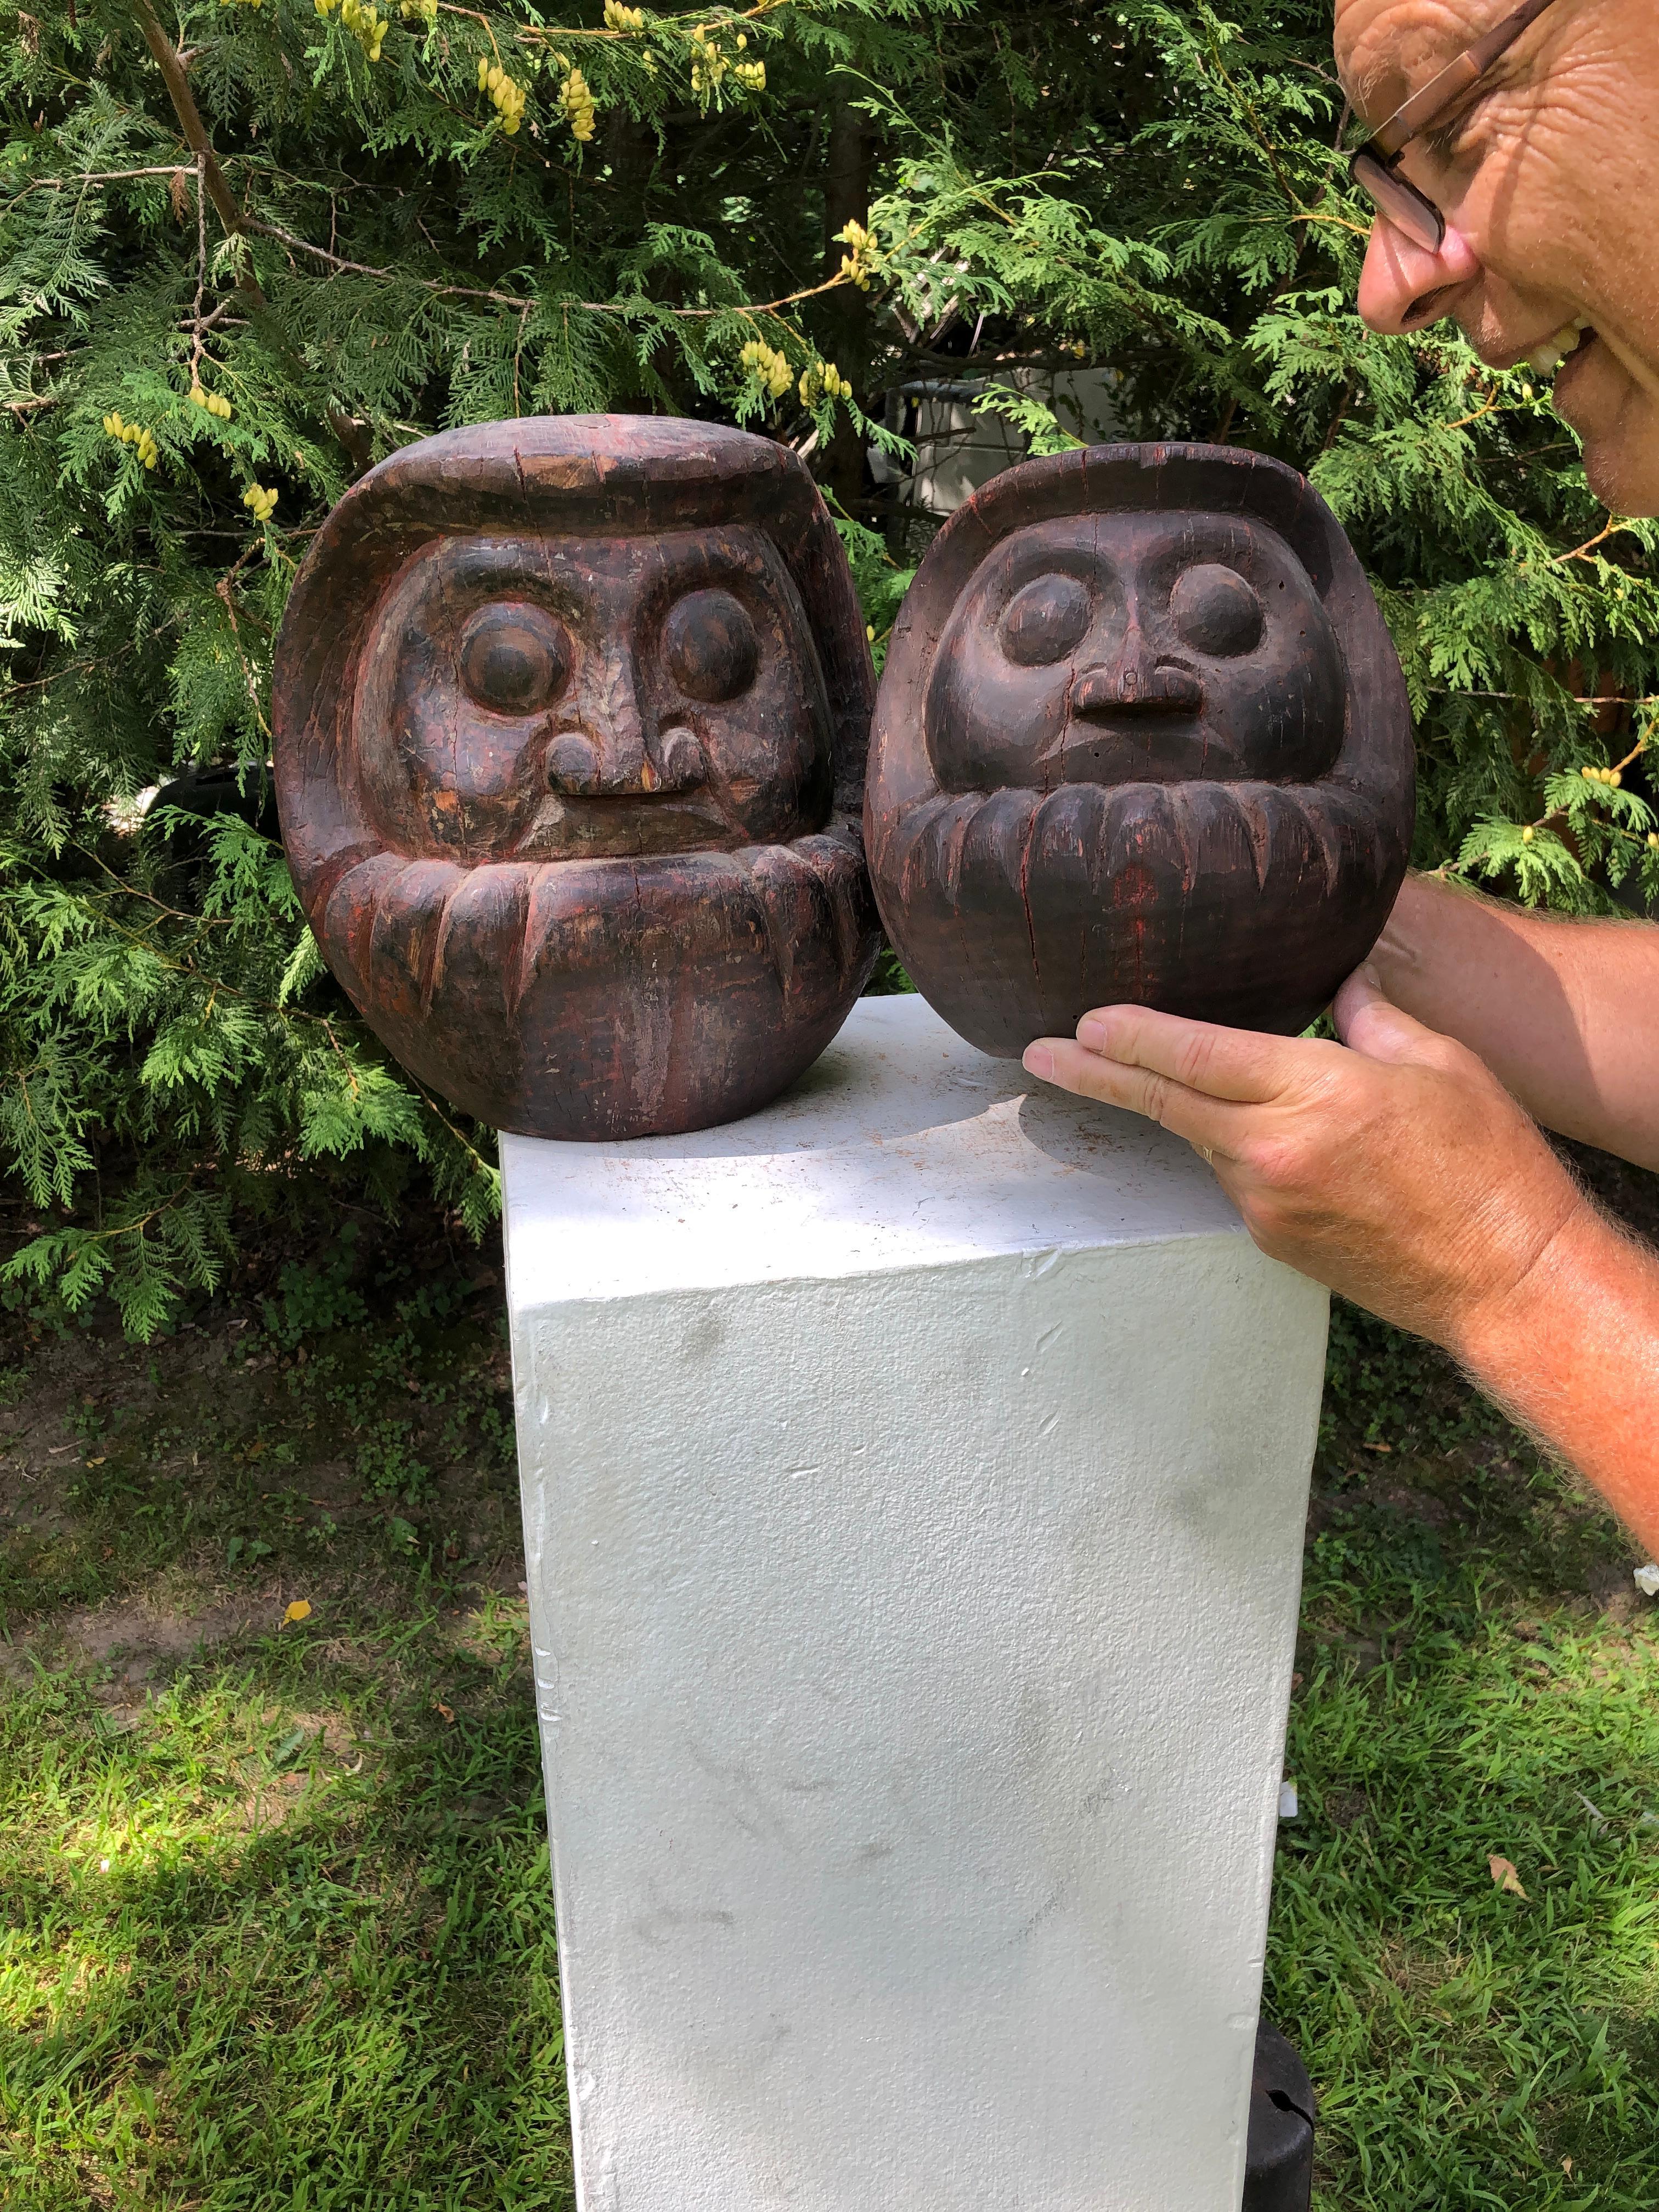 From our recent Japanese Acquisitions Travels

A rare pair

Japan, a dramatic large-scale antique pair of hand carved Daruma wooden sculptures - a wonderful set of precious Talismans signifying good luck and perseverance dating to the late 19th